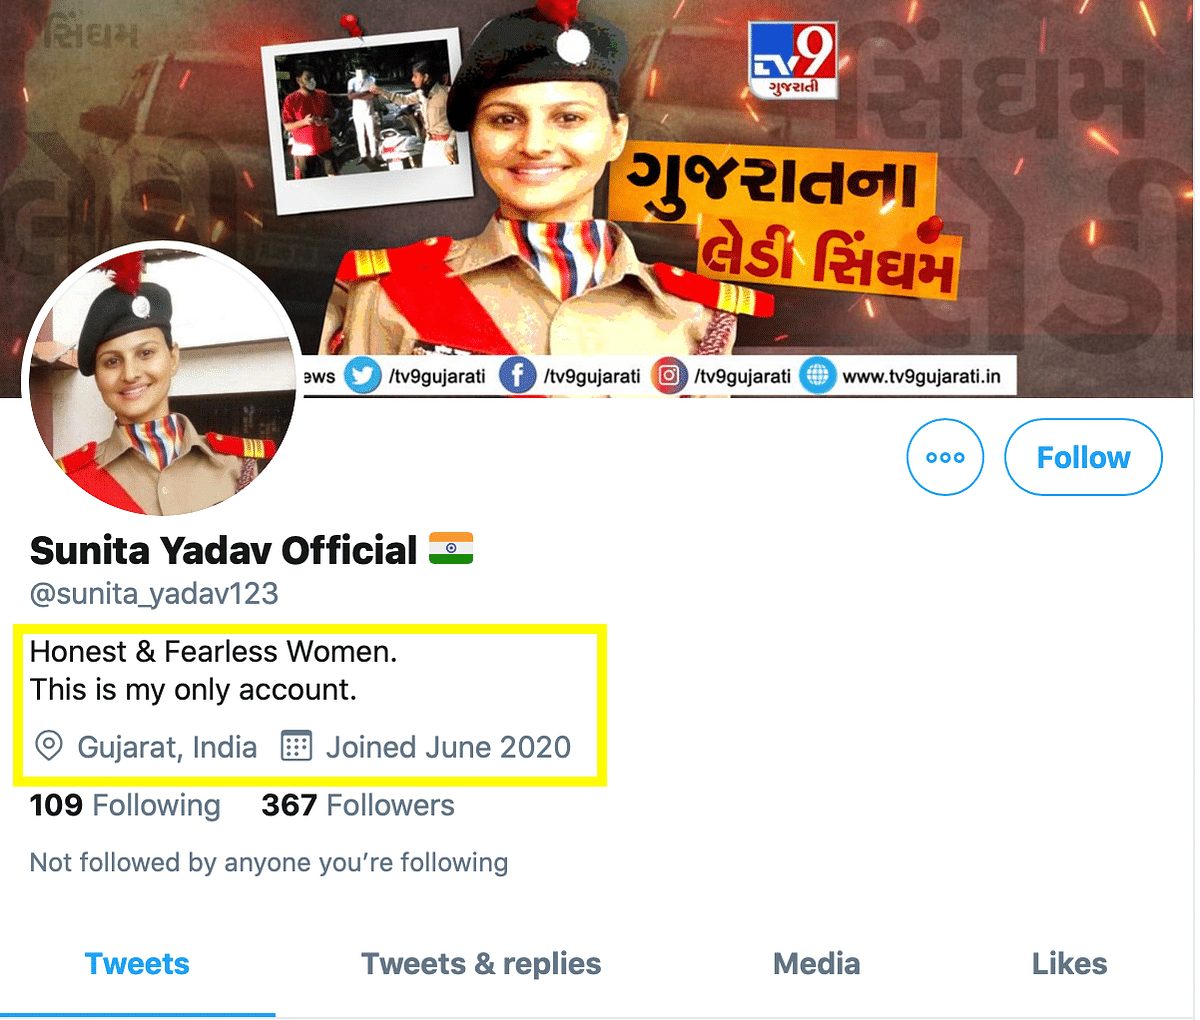 Speaking to The Quint, Yadav, too, confirmed that all these profiles are fake and that she is not on Twitter.